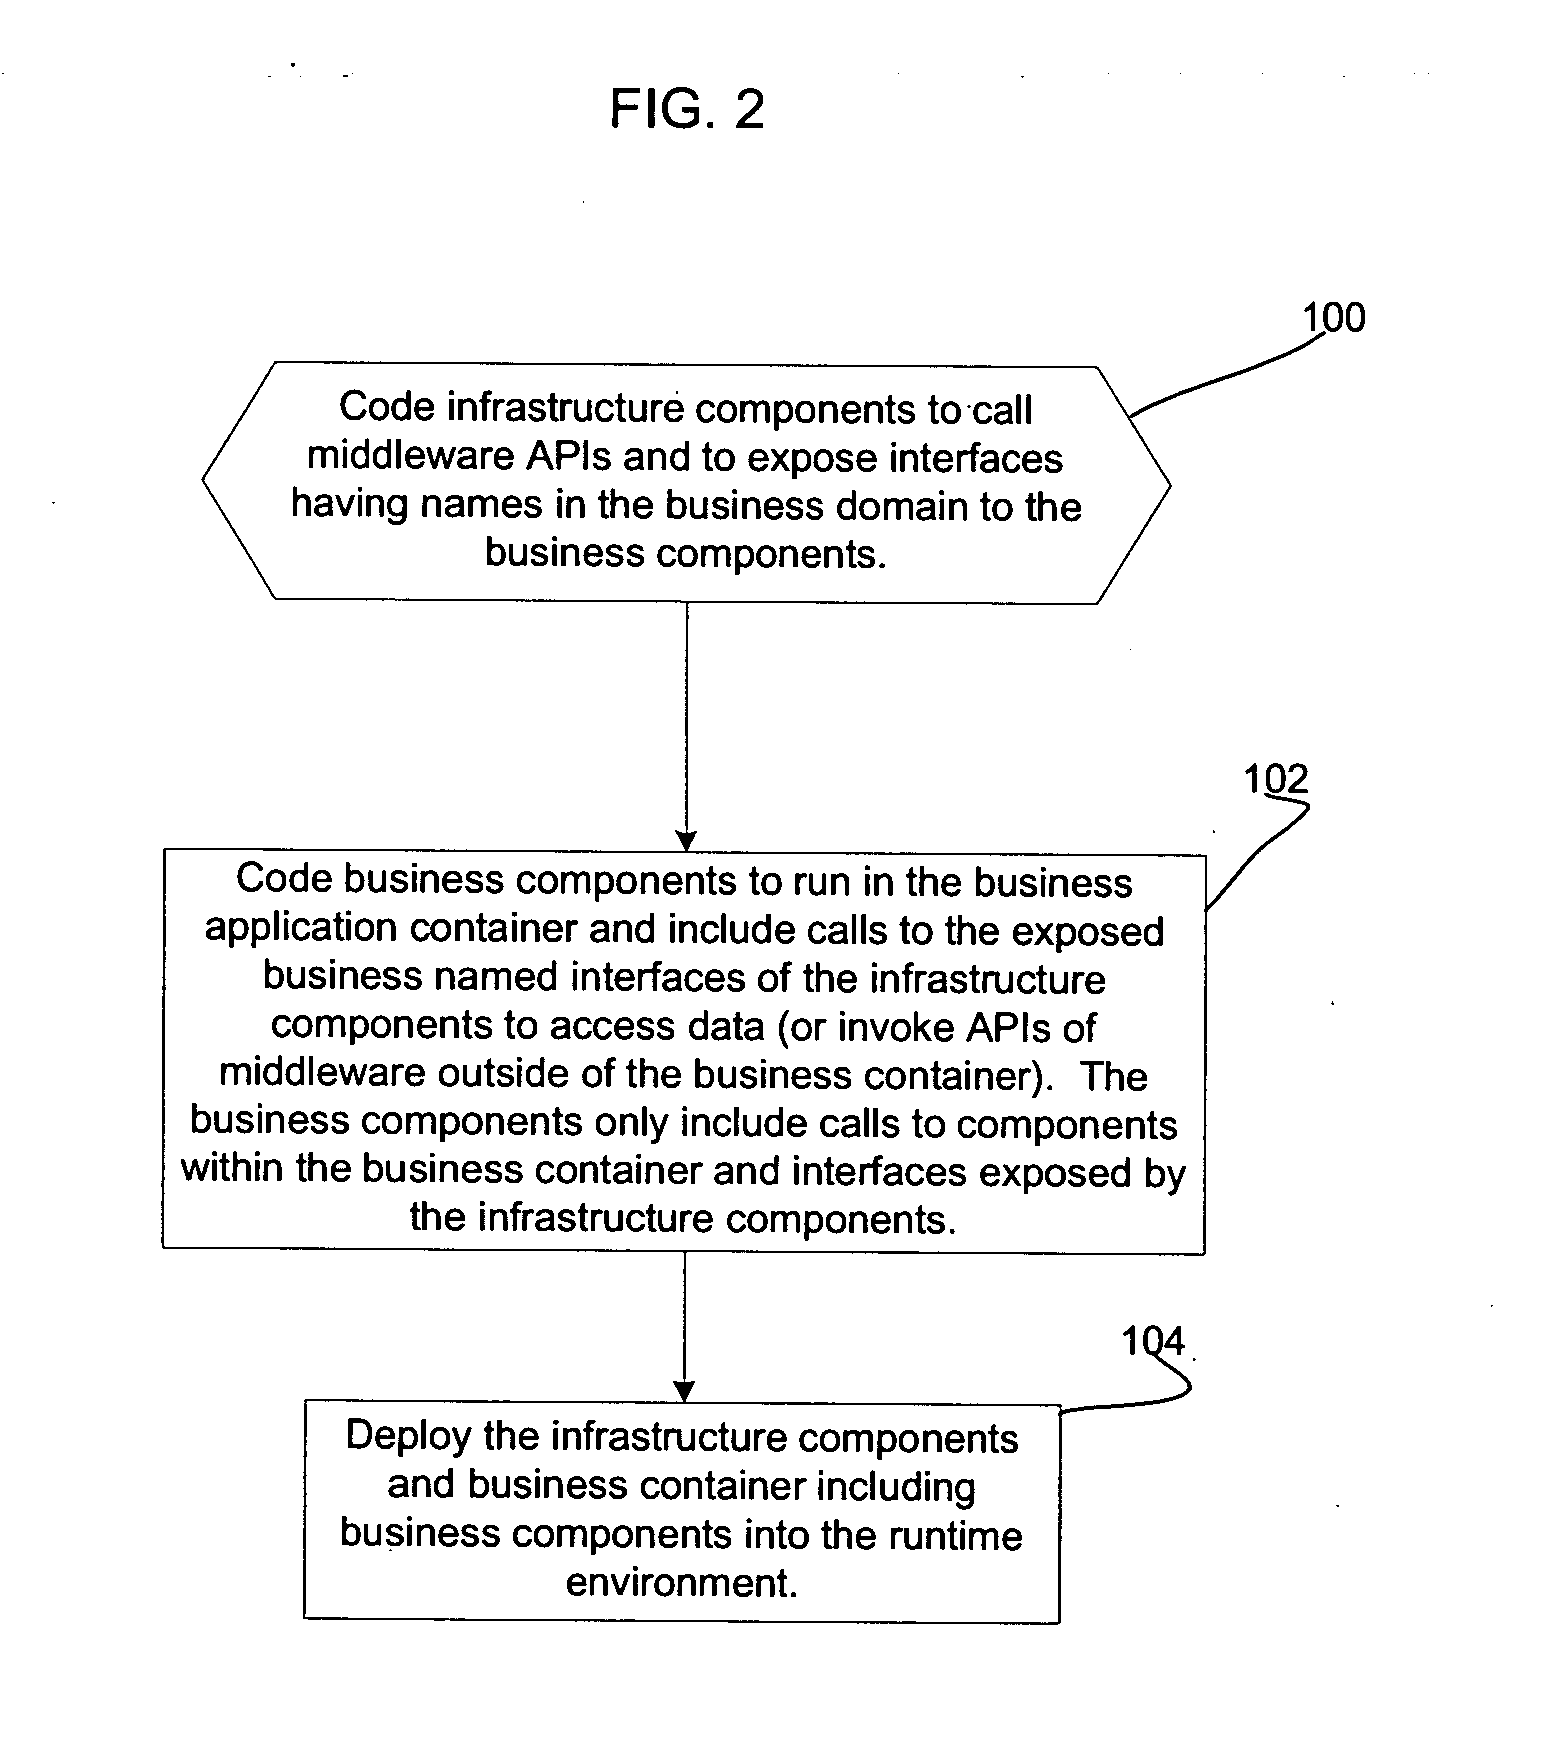 Architecture for enabling business components to access middleware application programming interfaces (APIs) in a runtime environment